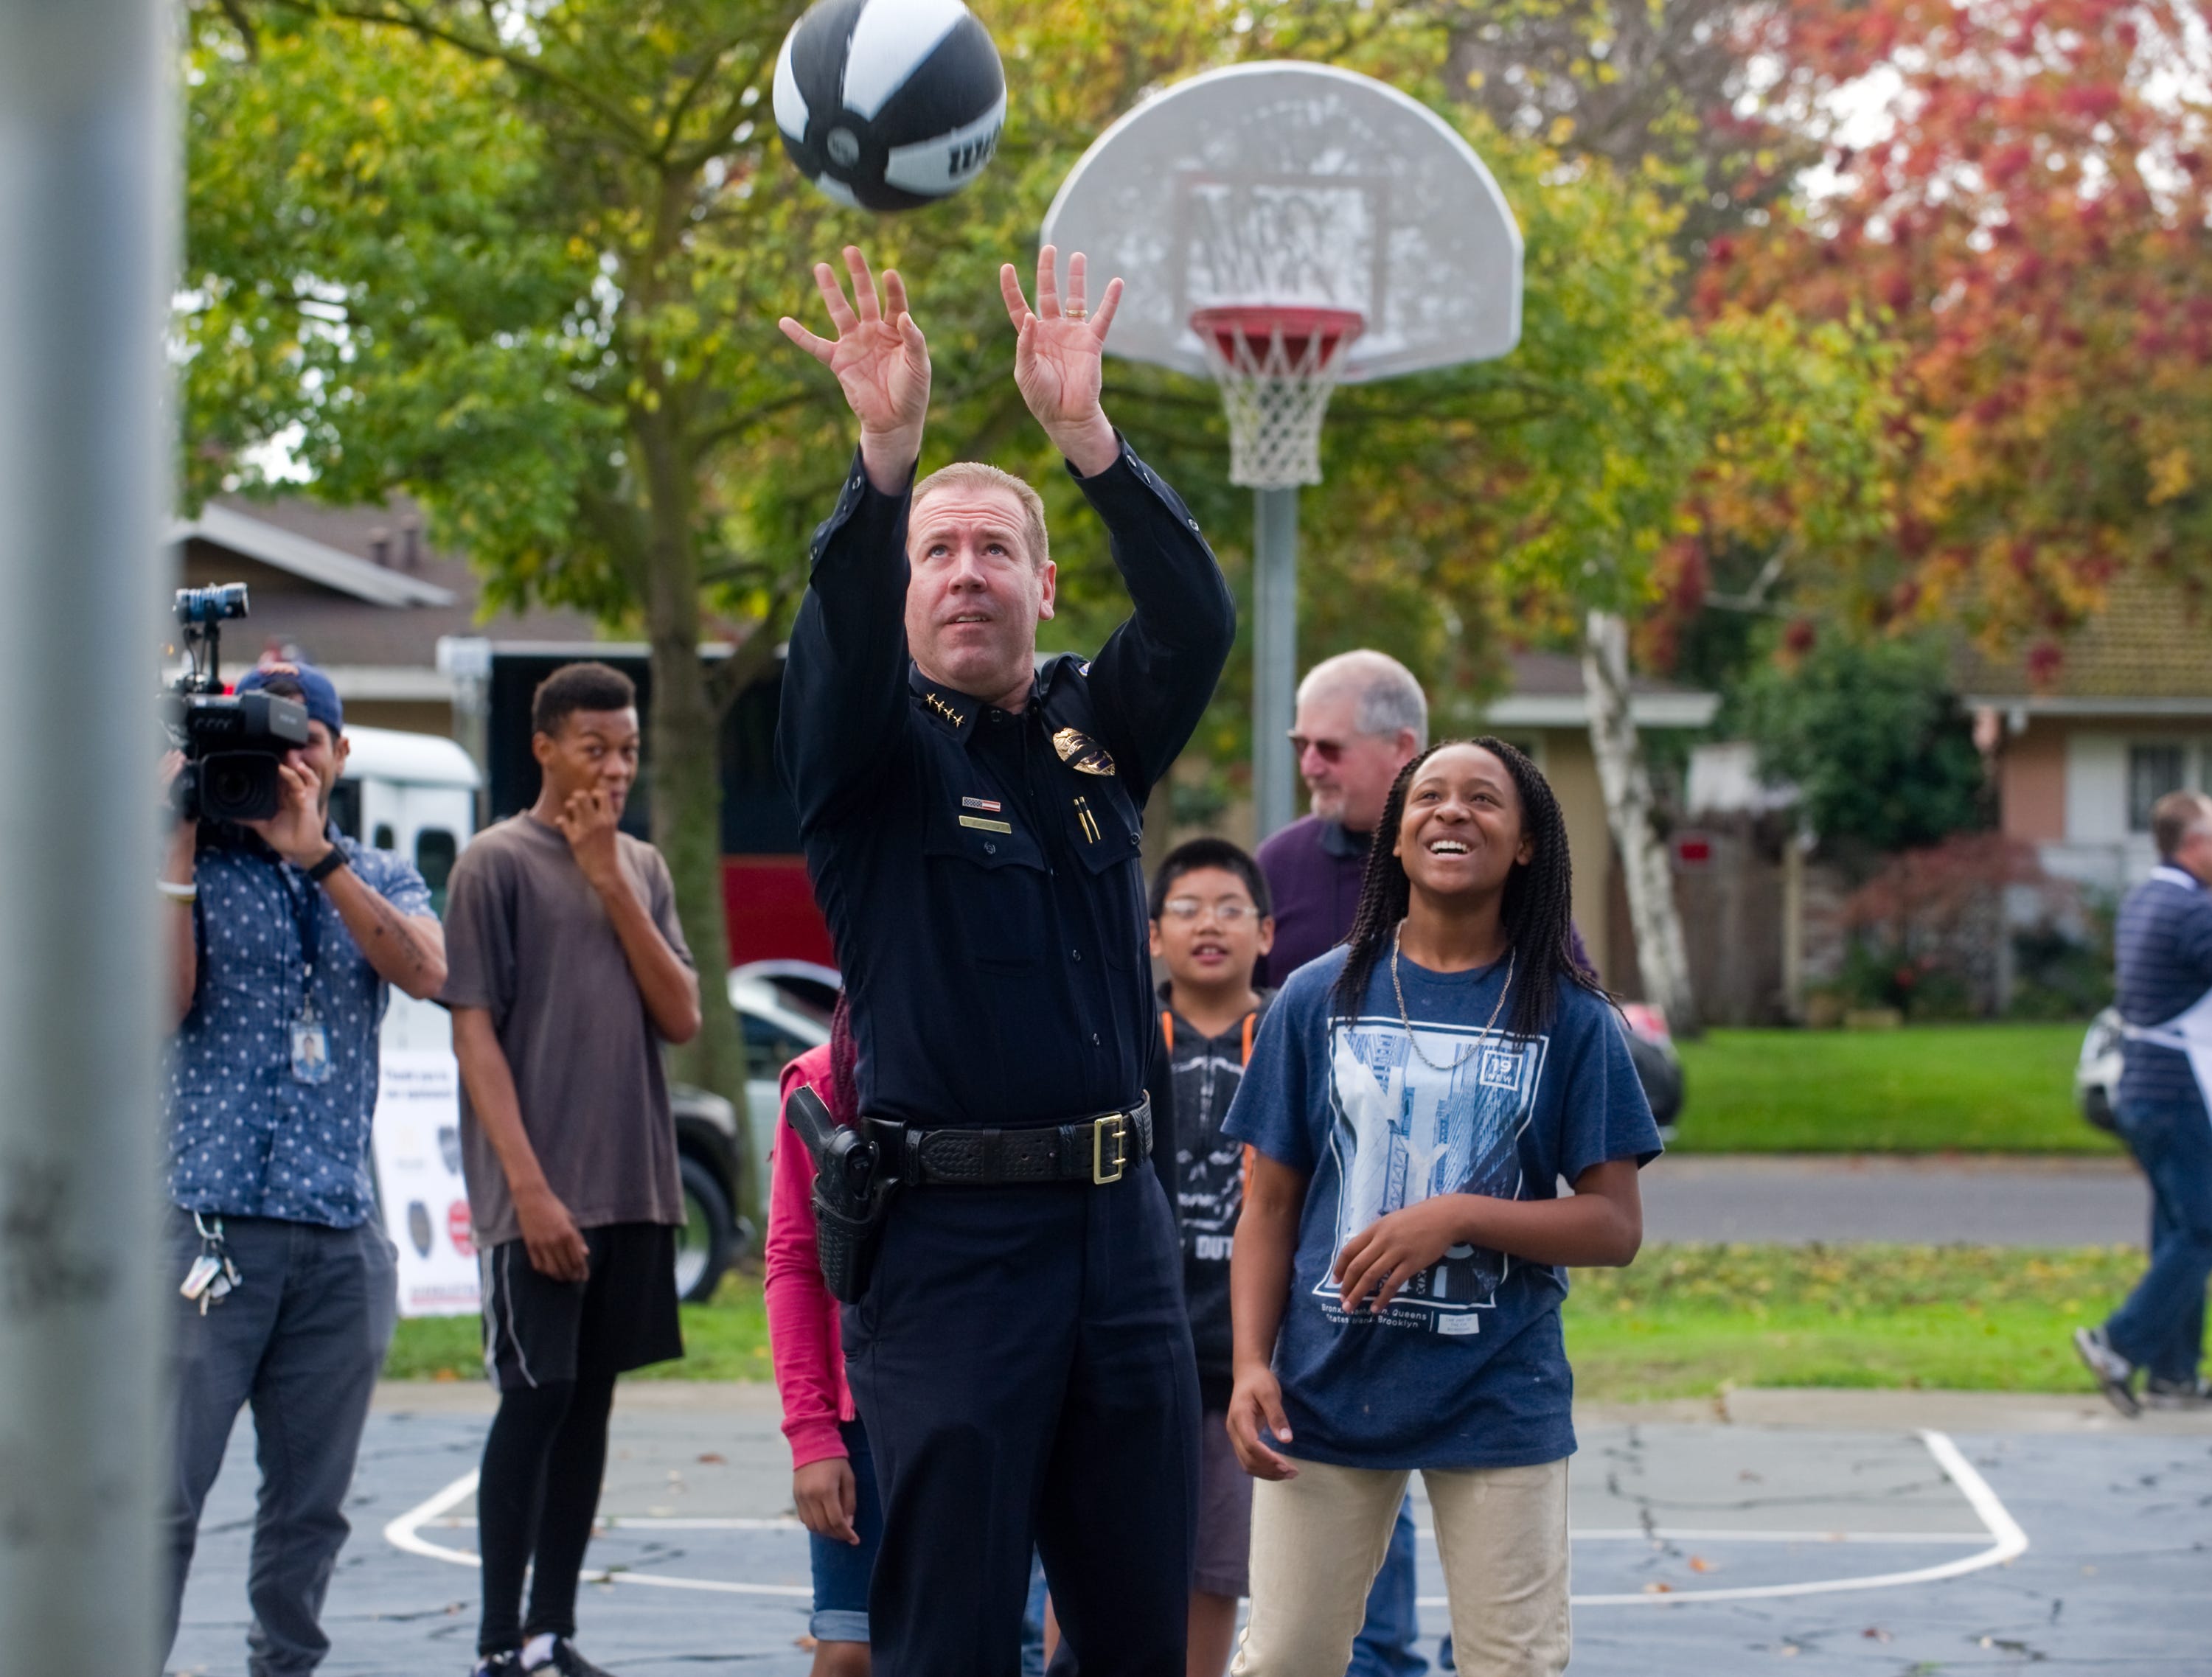 Stockton Police Chief Eric Jones shoots free throws with area children at the department's community barbecue at Loch Lomond Park in north Stockton on Nov. 21, 2016. Police are now going “much deeper into the type of community policing we do,” Jones said, and activities like these play a large part.